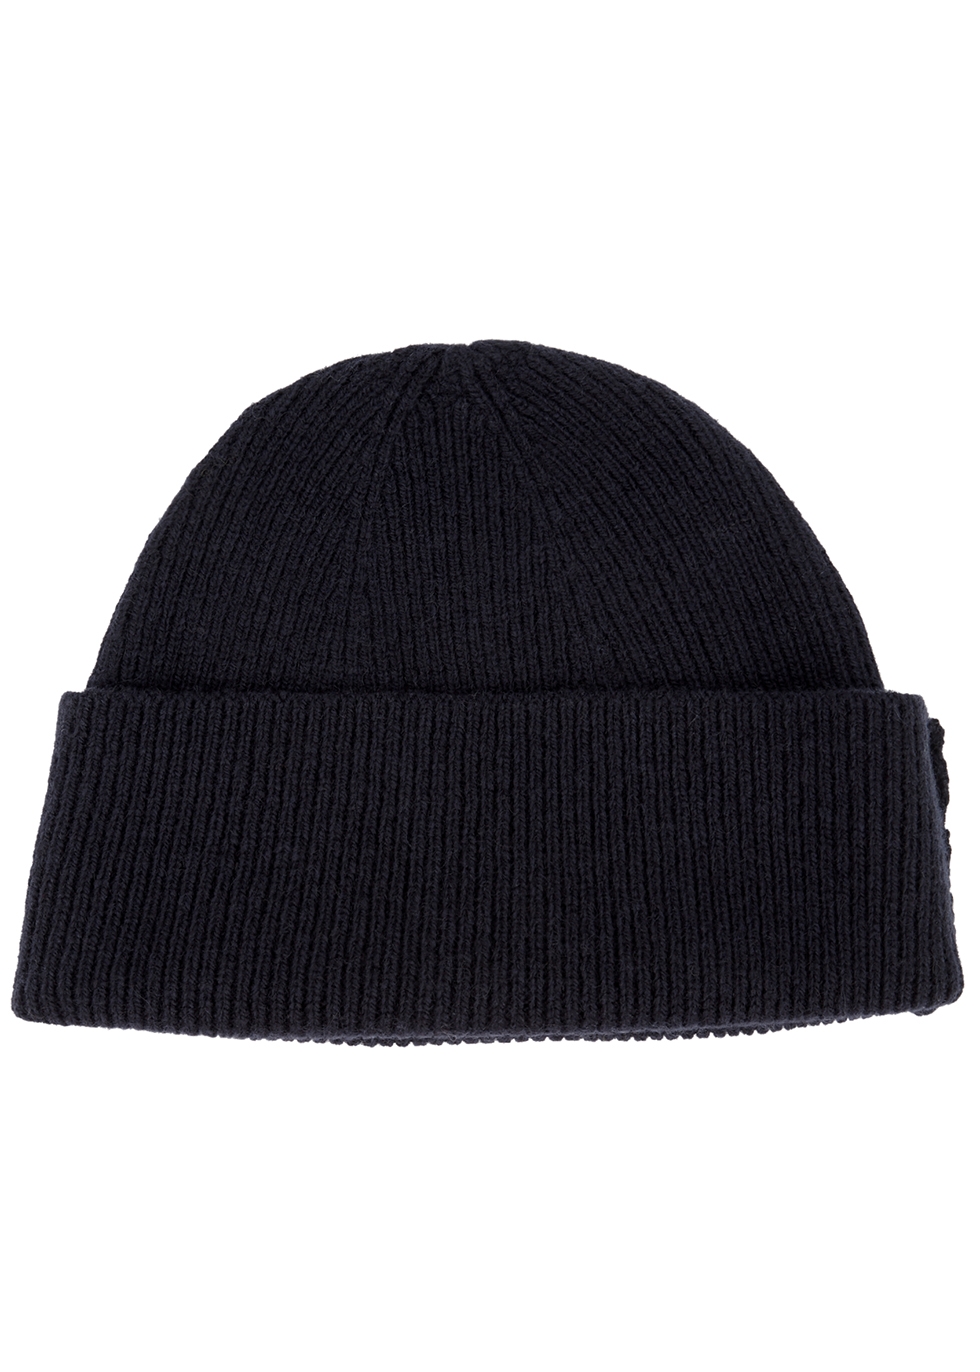 Navy wool and cashmere-blend beanie